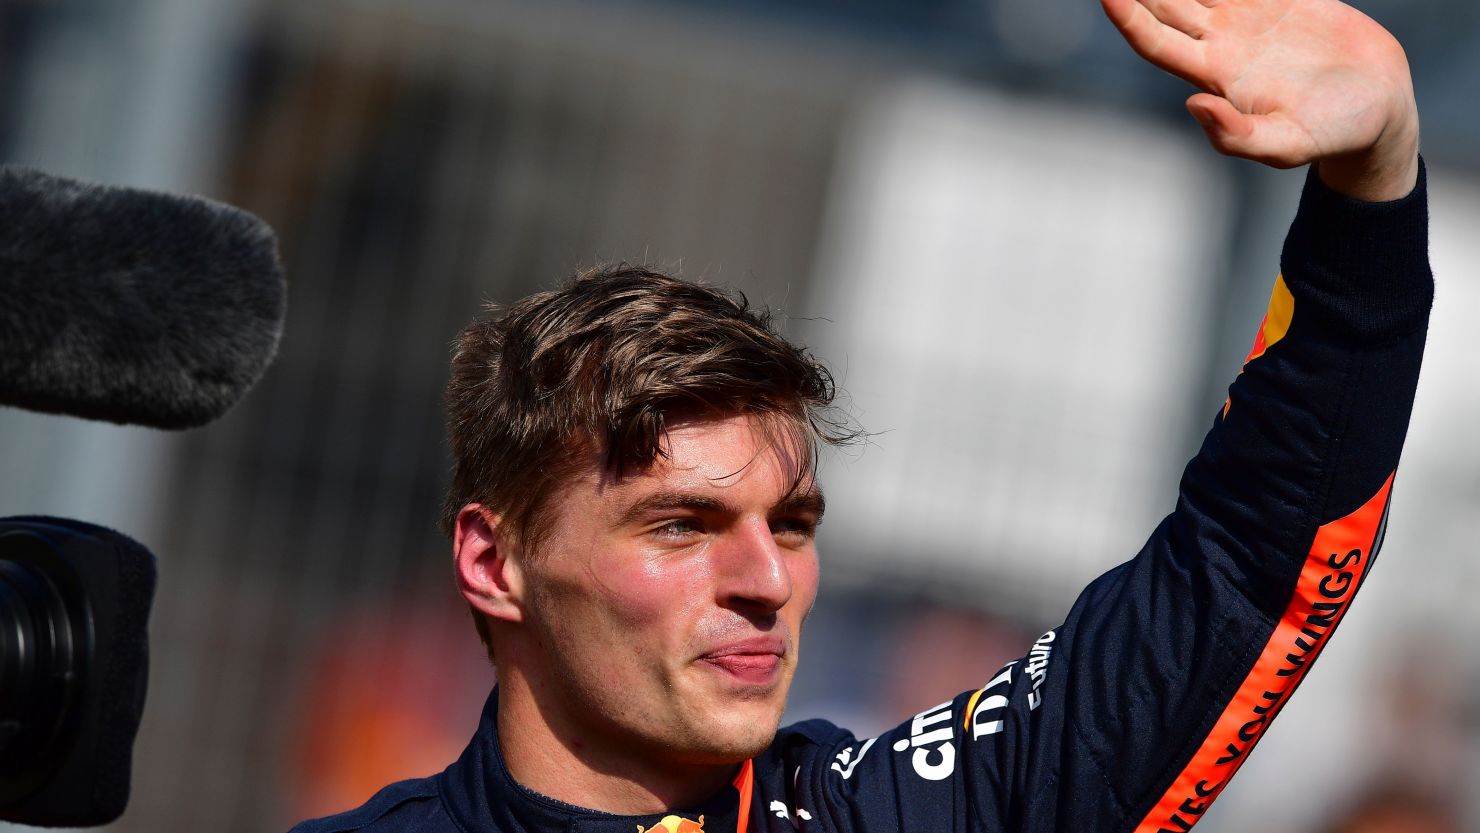 Max Verstappen waves to his traveling fans after securing the first pole position of his F1 career.